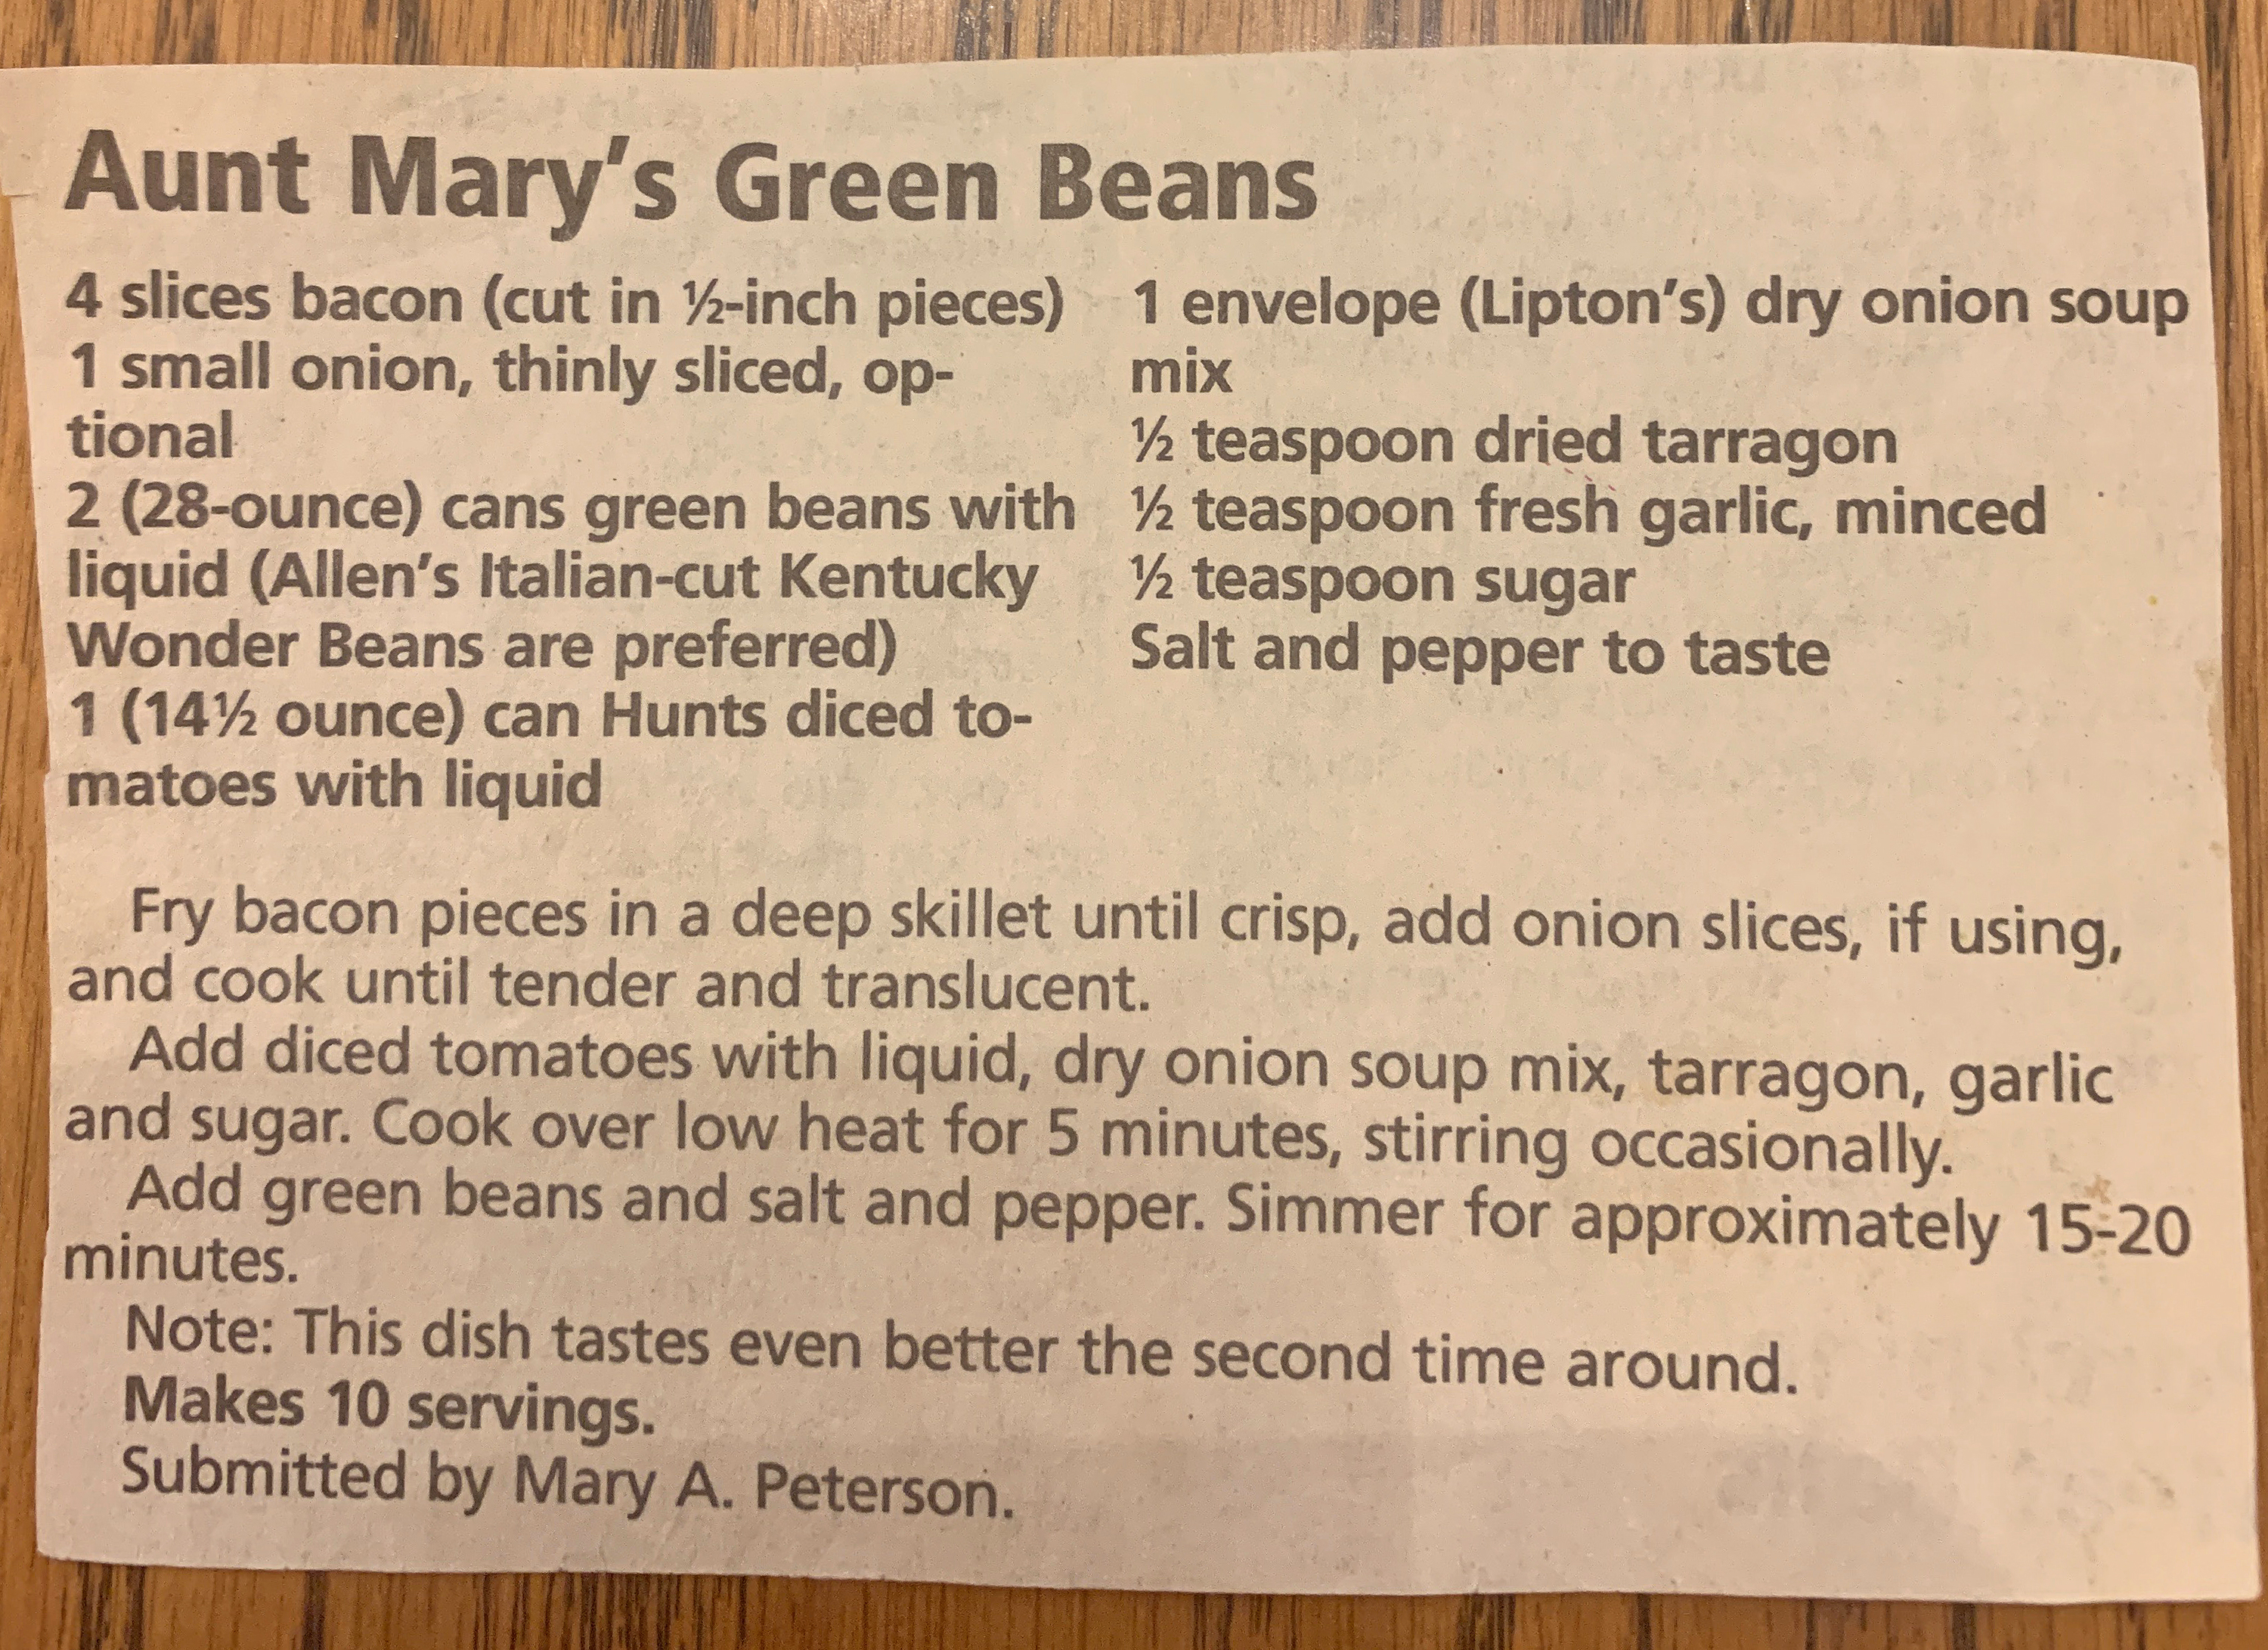 Aunt Mary's Green Beans Recipe